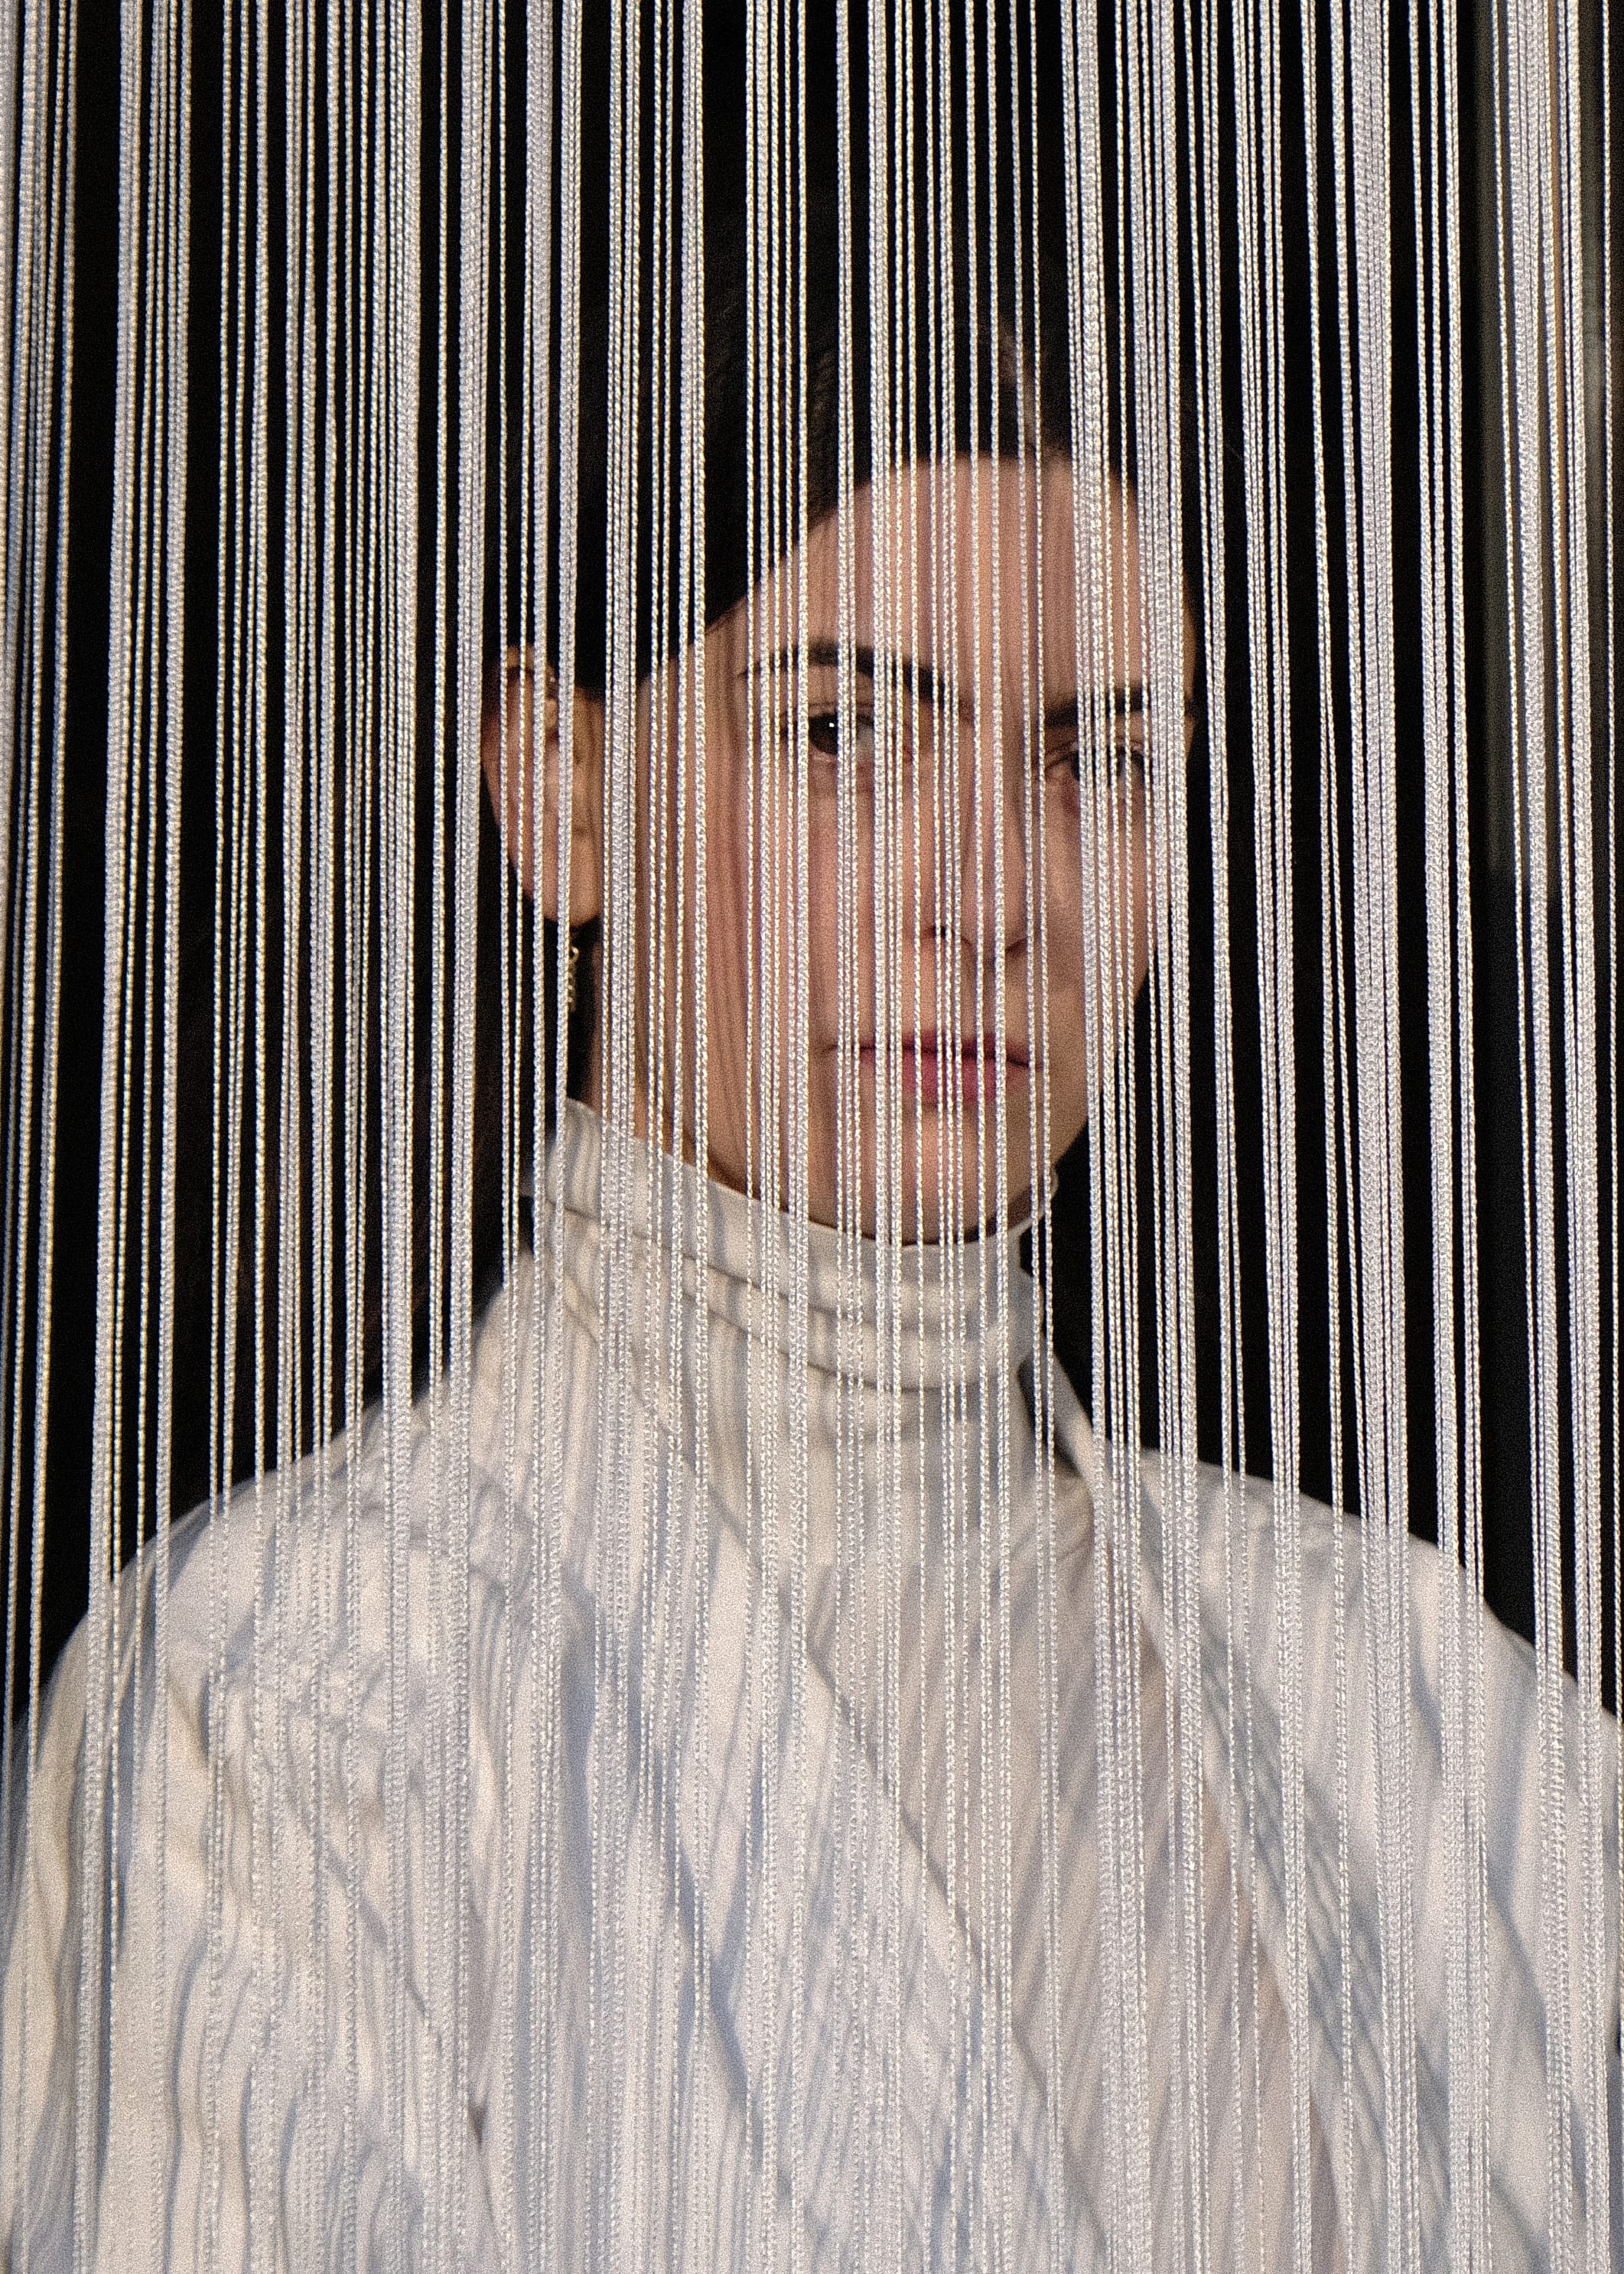 Jeanne Vicerial. Photograph by Joseph Schiano di Lombo. Courtesy of the artist and Templon.